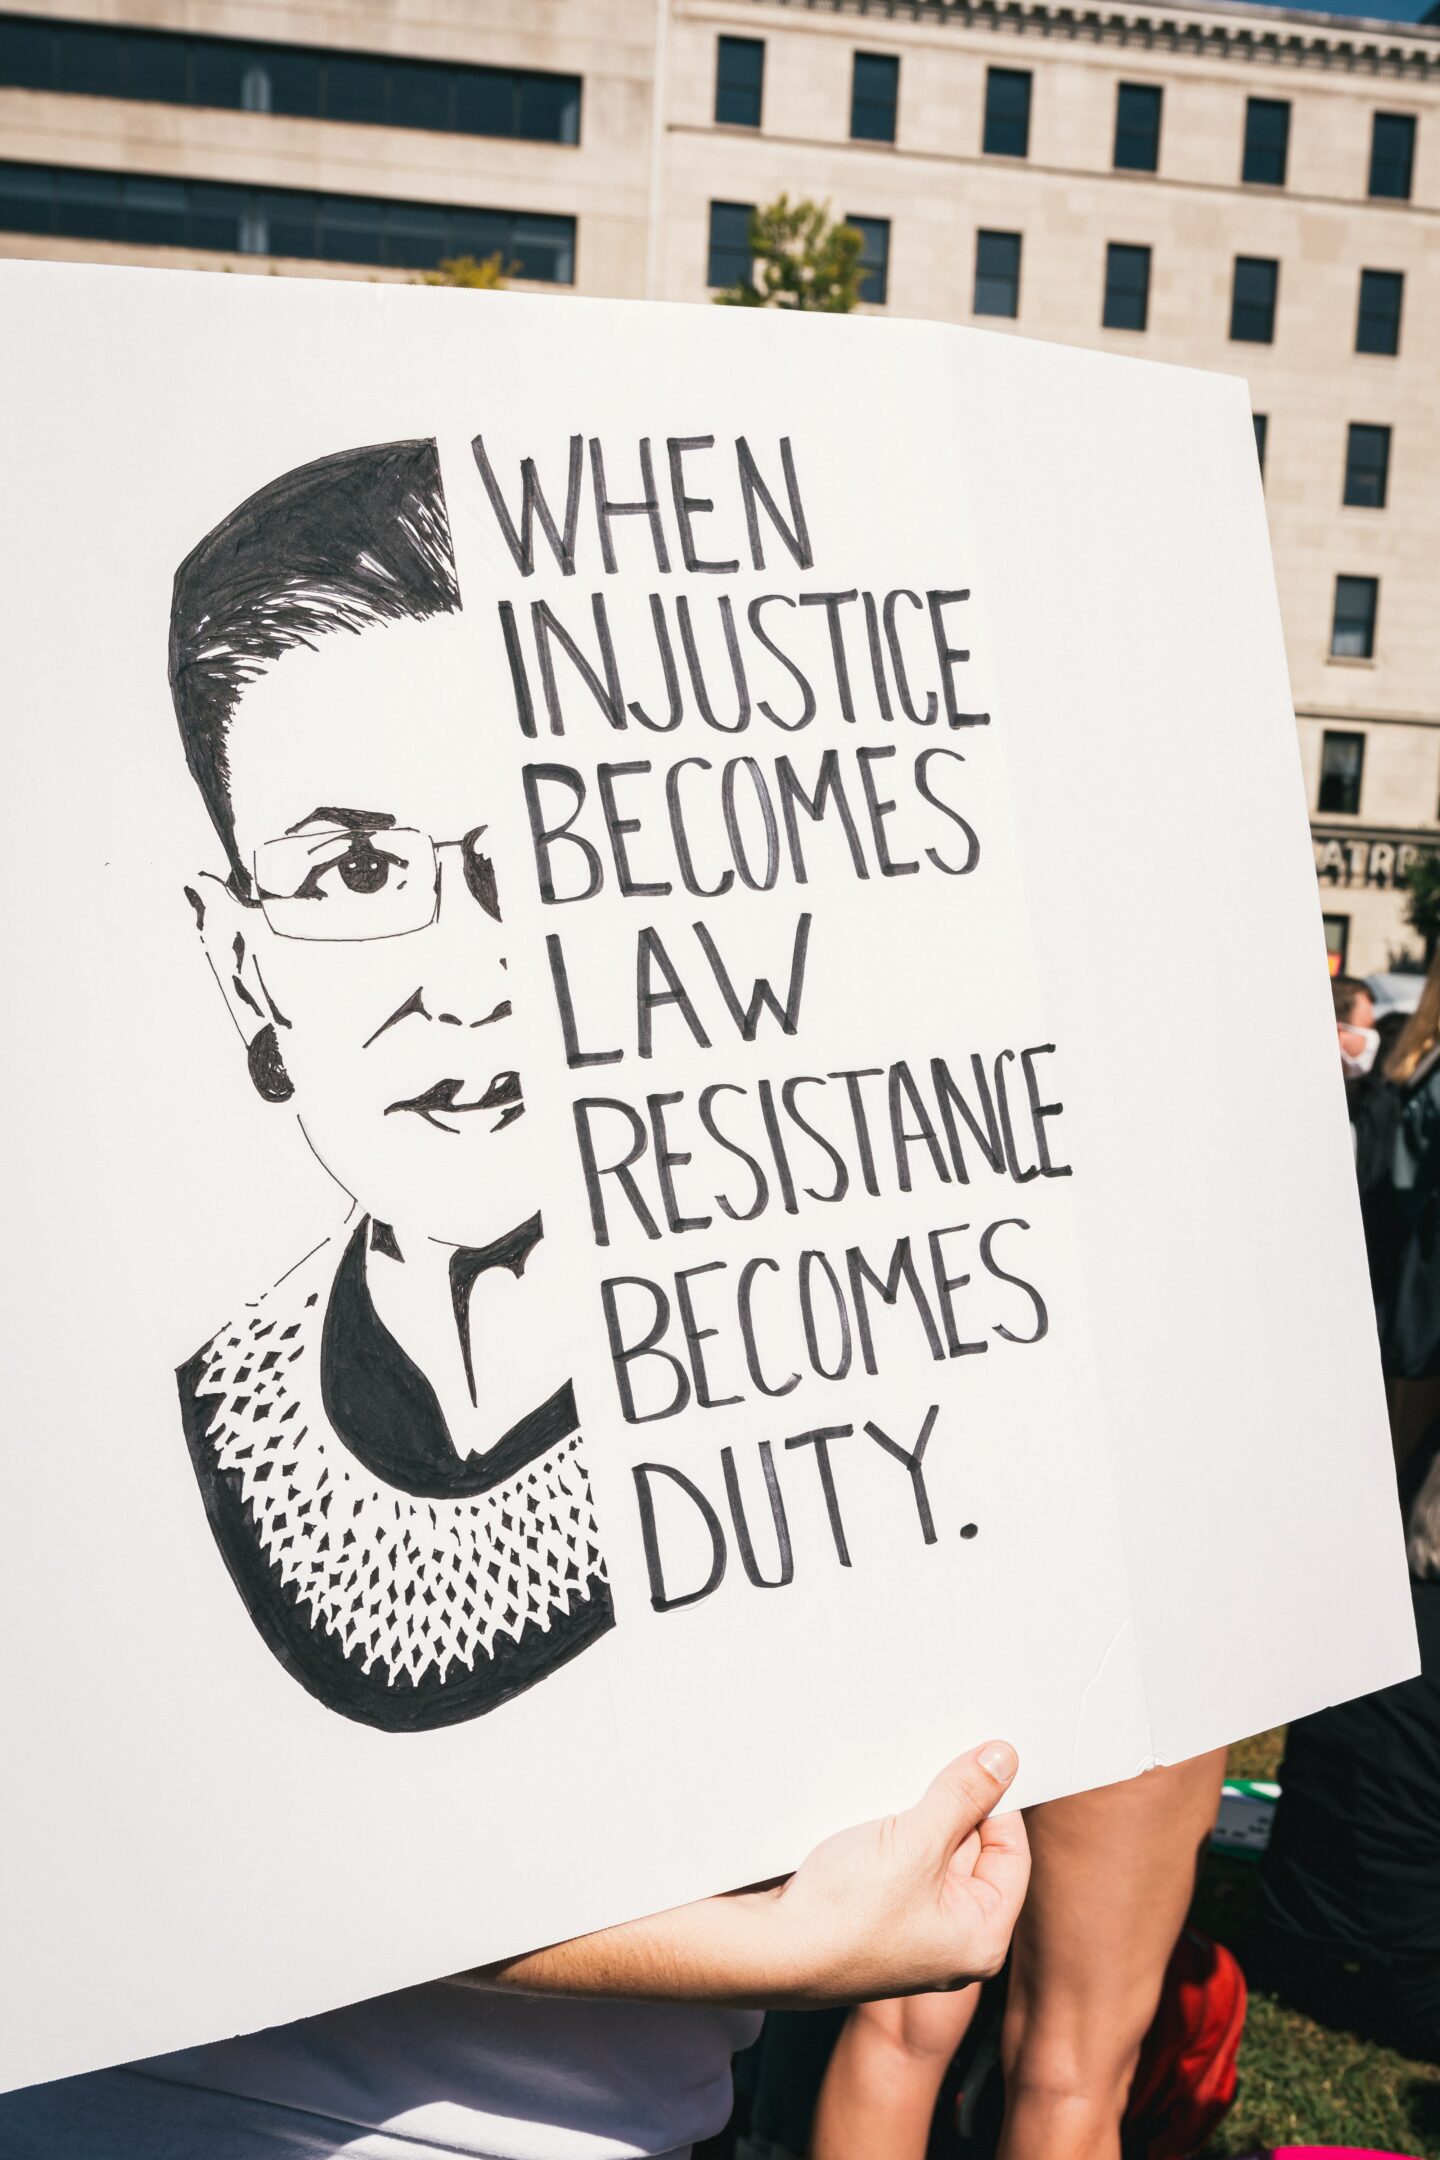 Actions To Take In A Post Roe America: when injustice becomes law, resistance becomes duty.